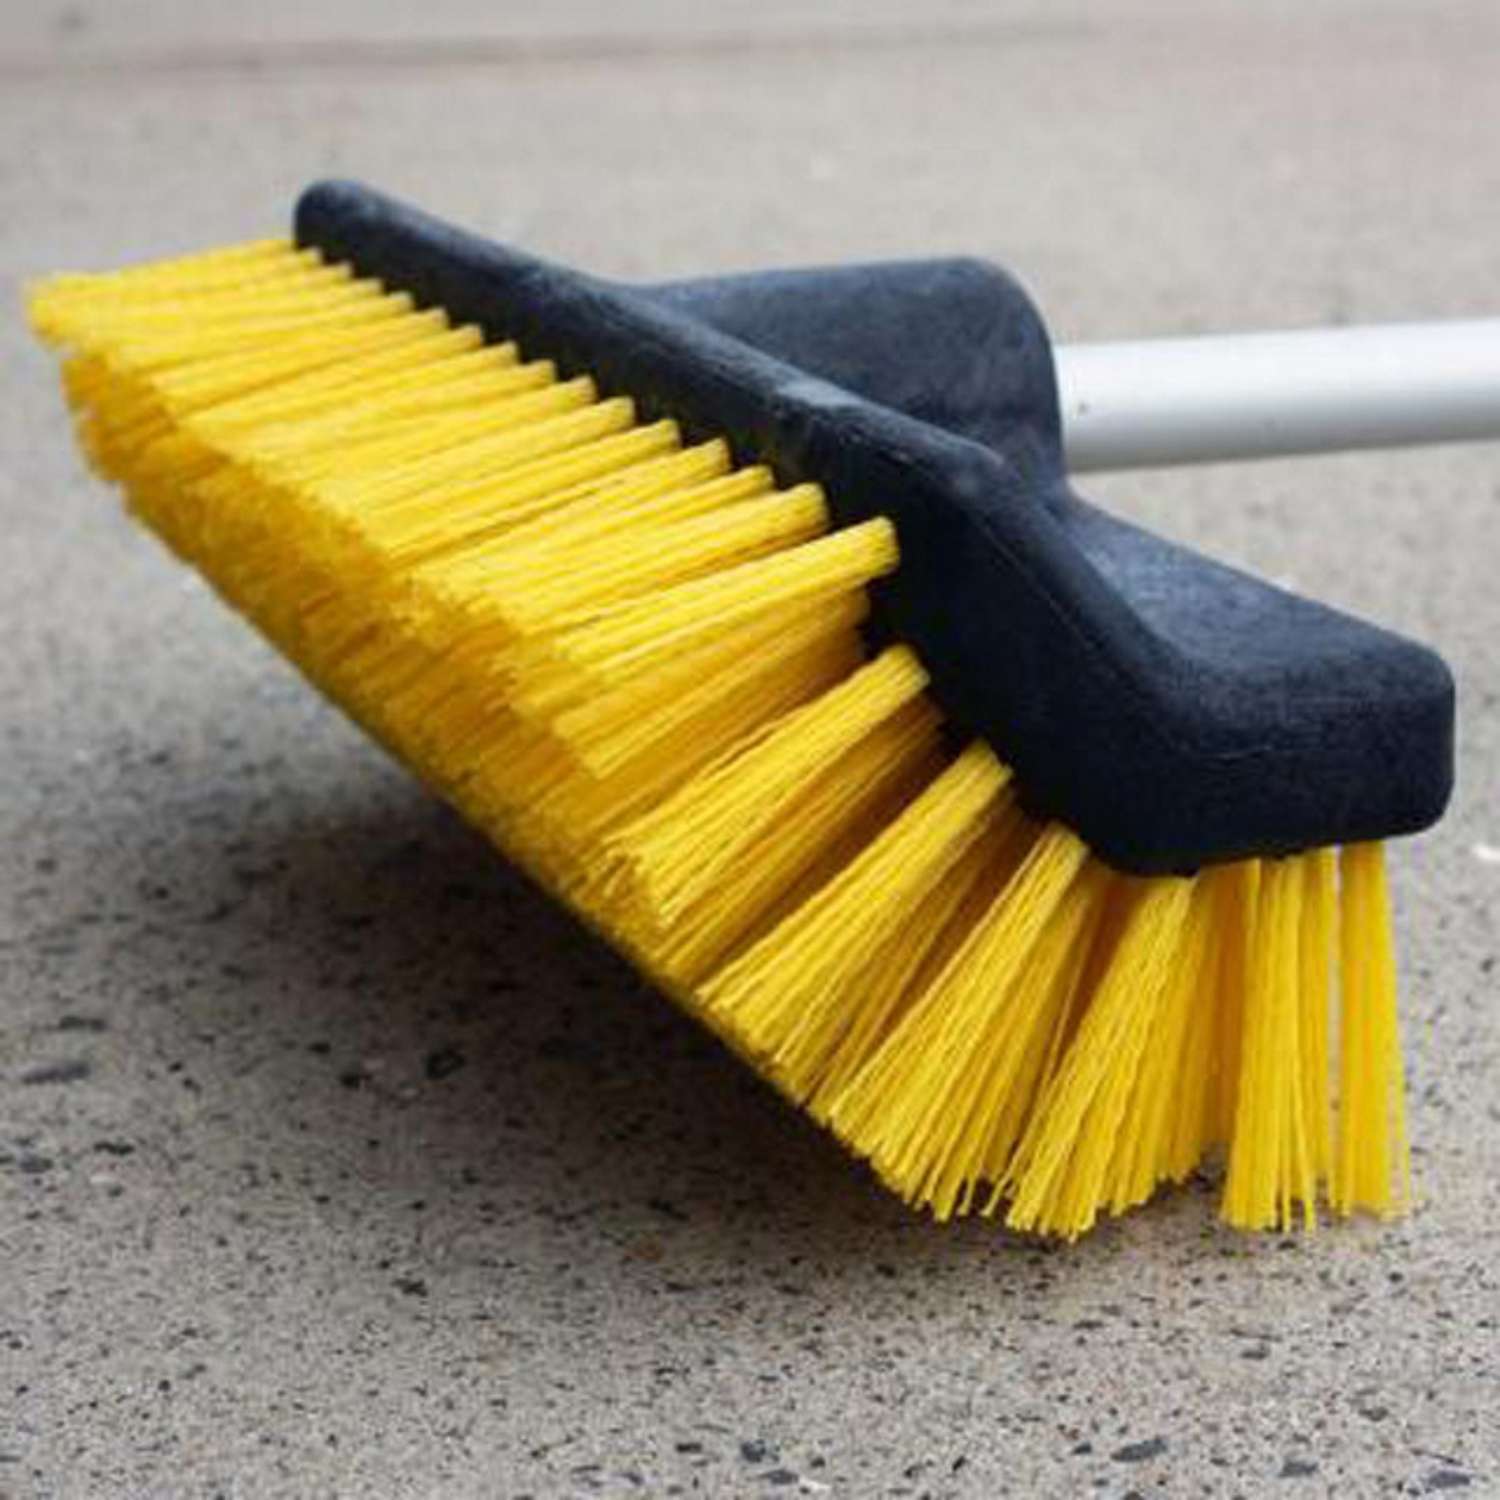 Professional Pool and Deck Scrub Brush with Handle